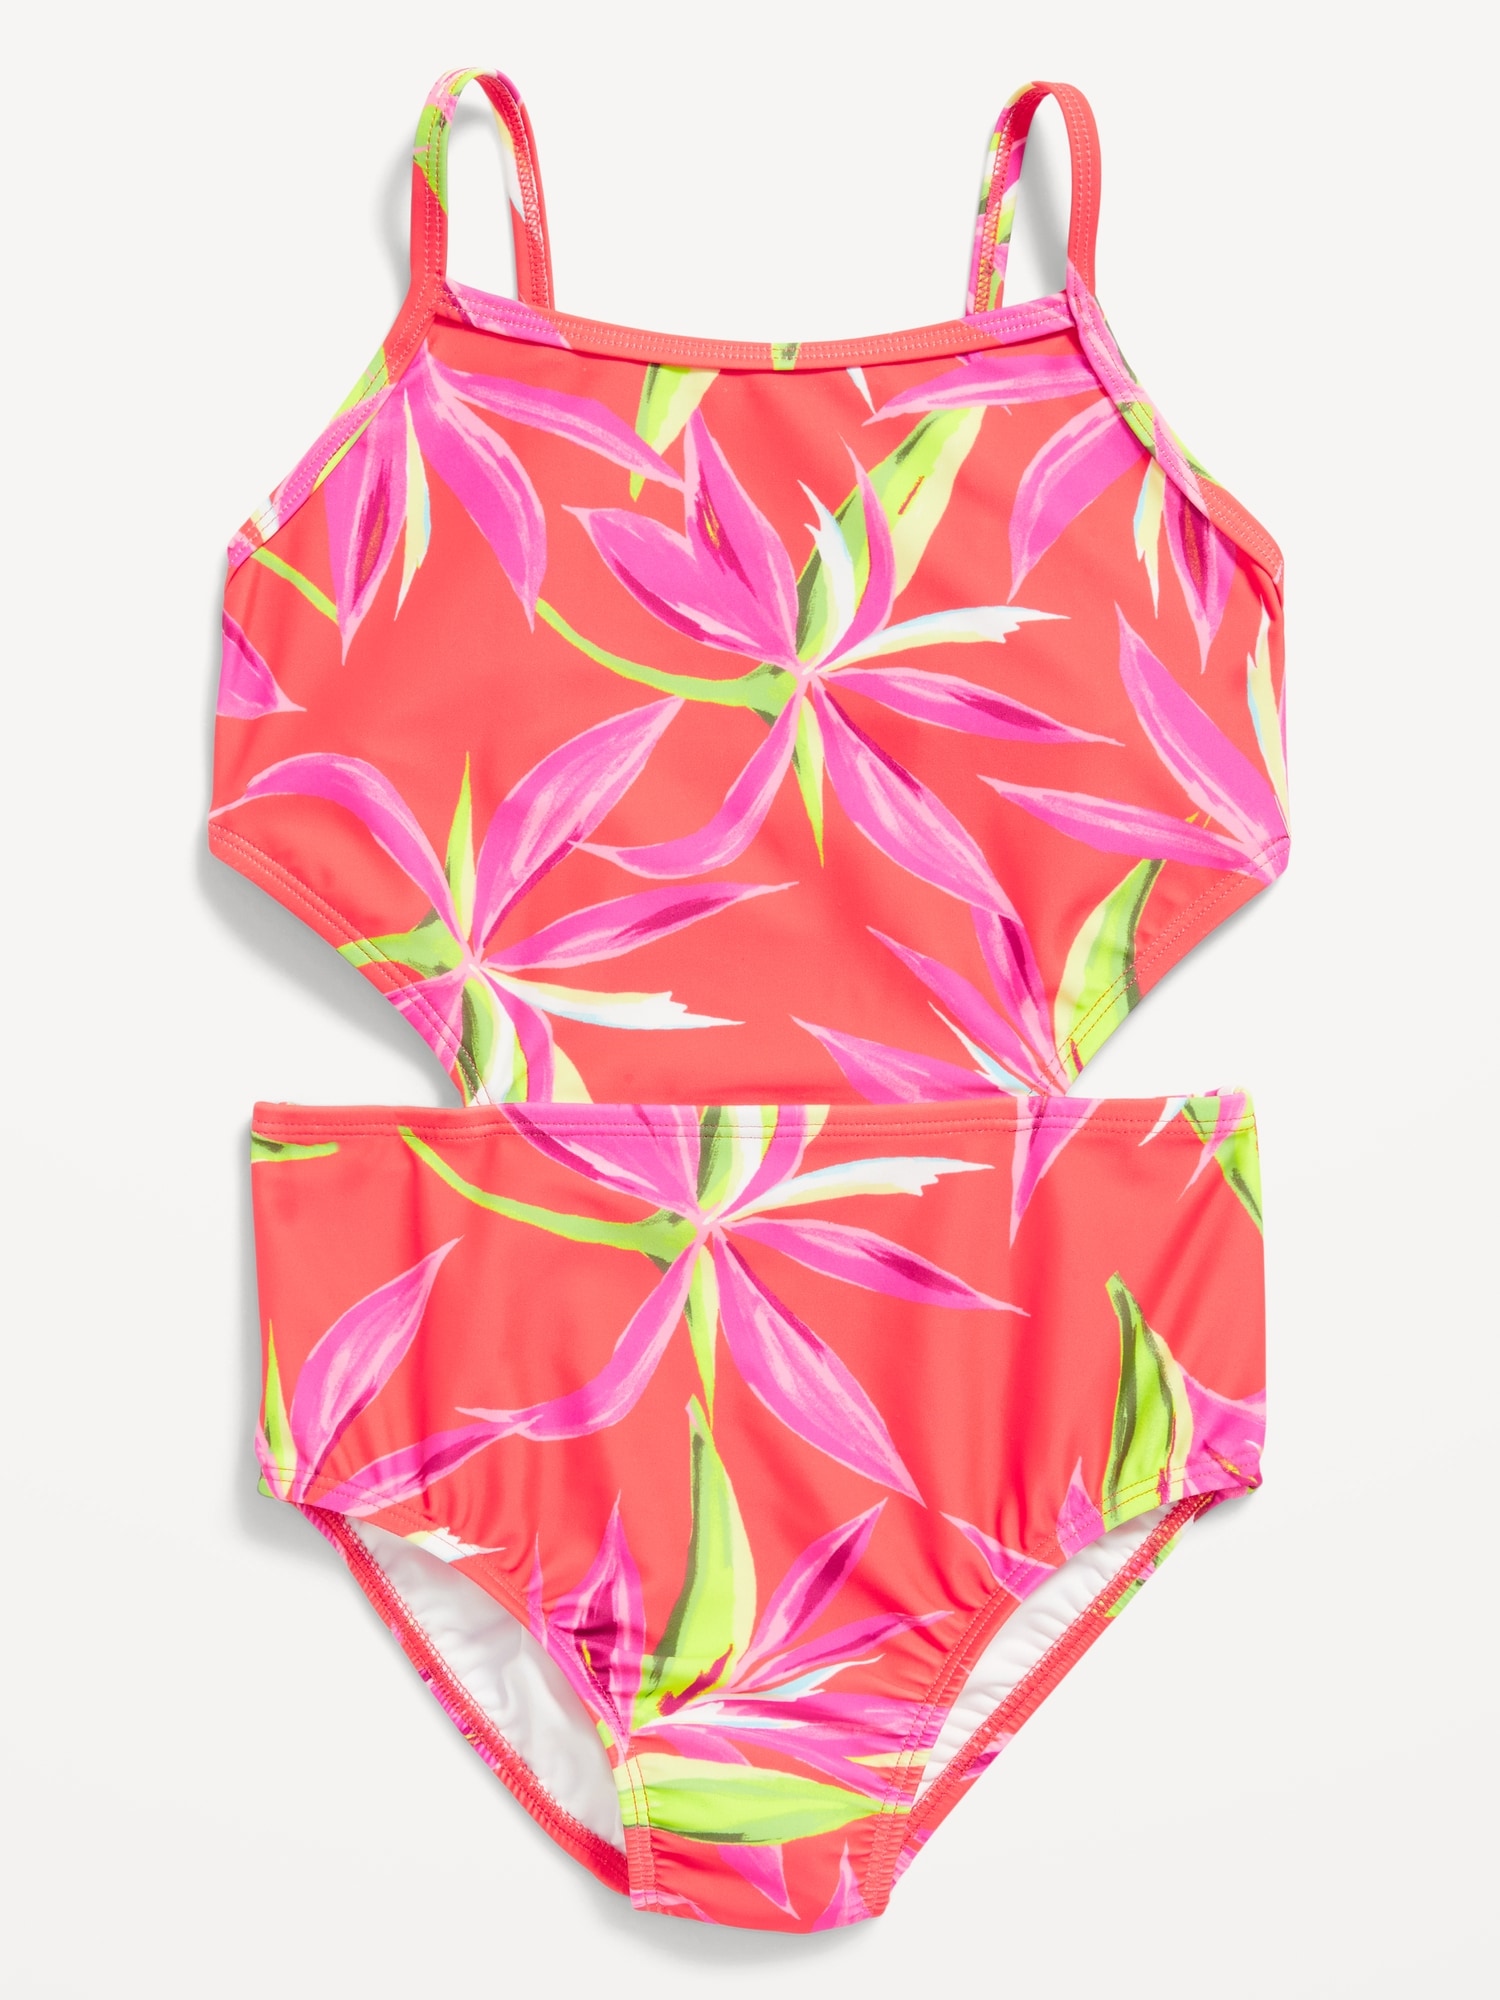 Old Navy Patterned Cut-Out-Waist One-Piece Swimsuit for Girls multi. 1